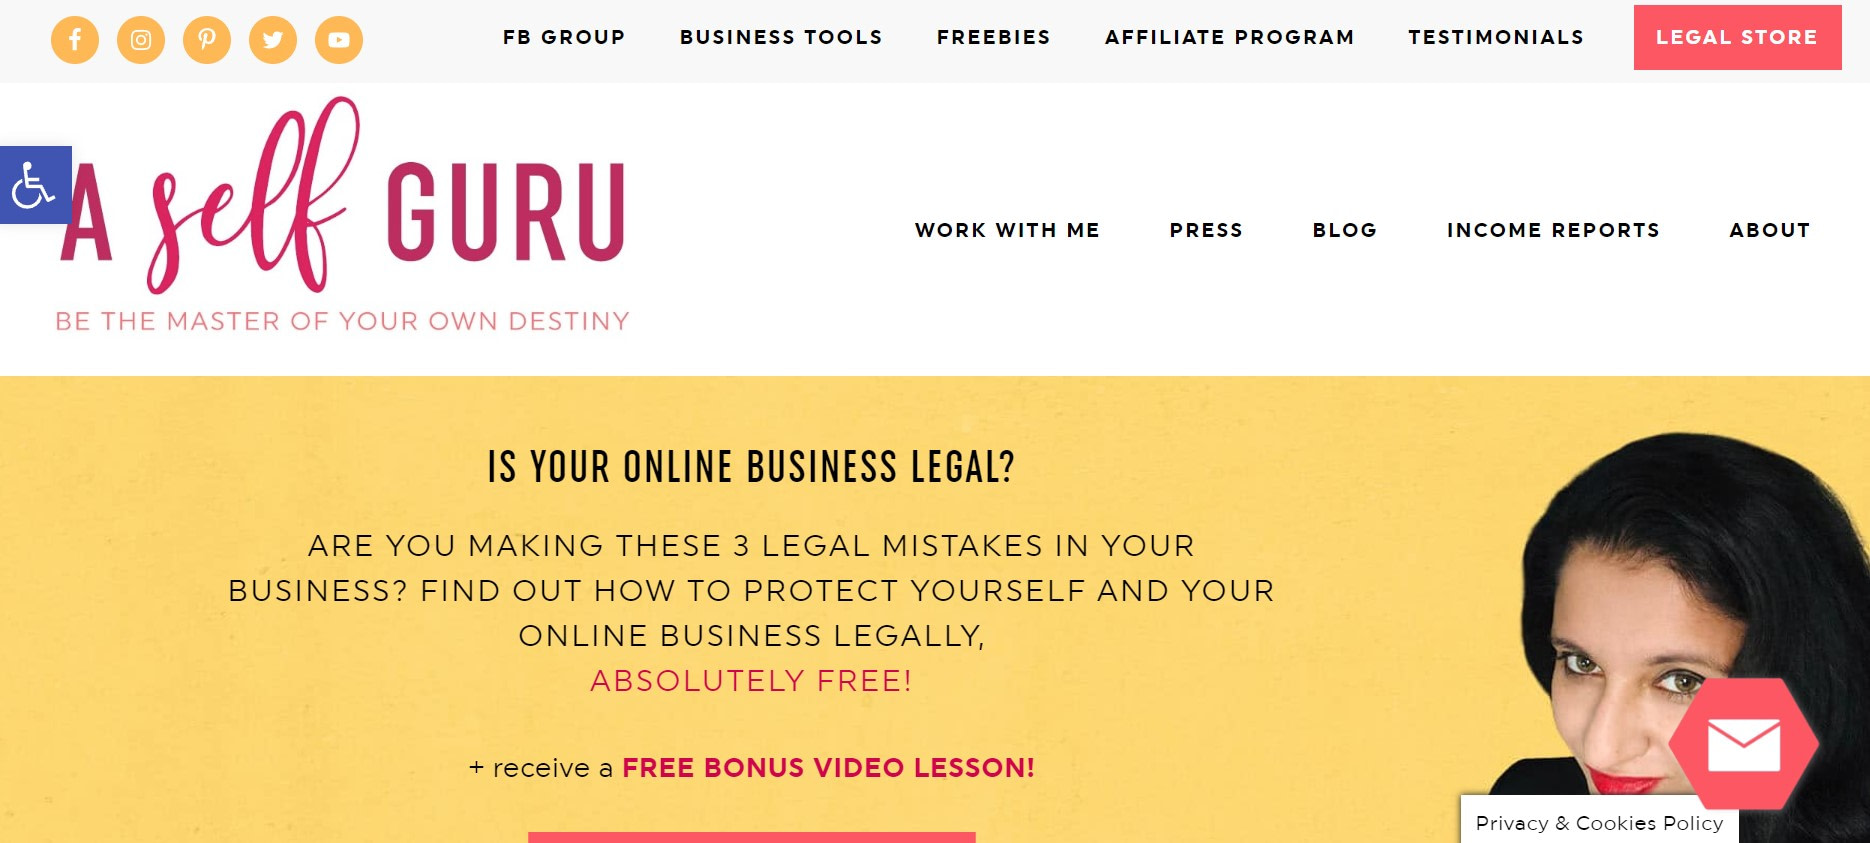 A Self Guru is one of the best legal blogs that make money. 